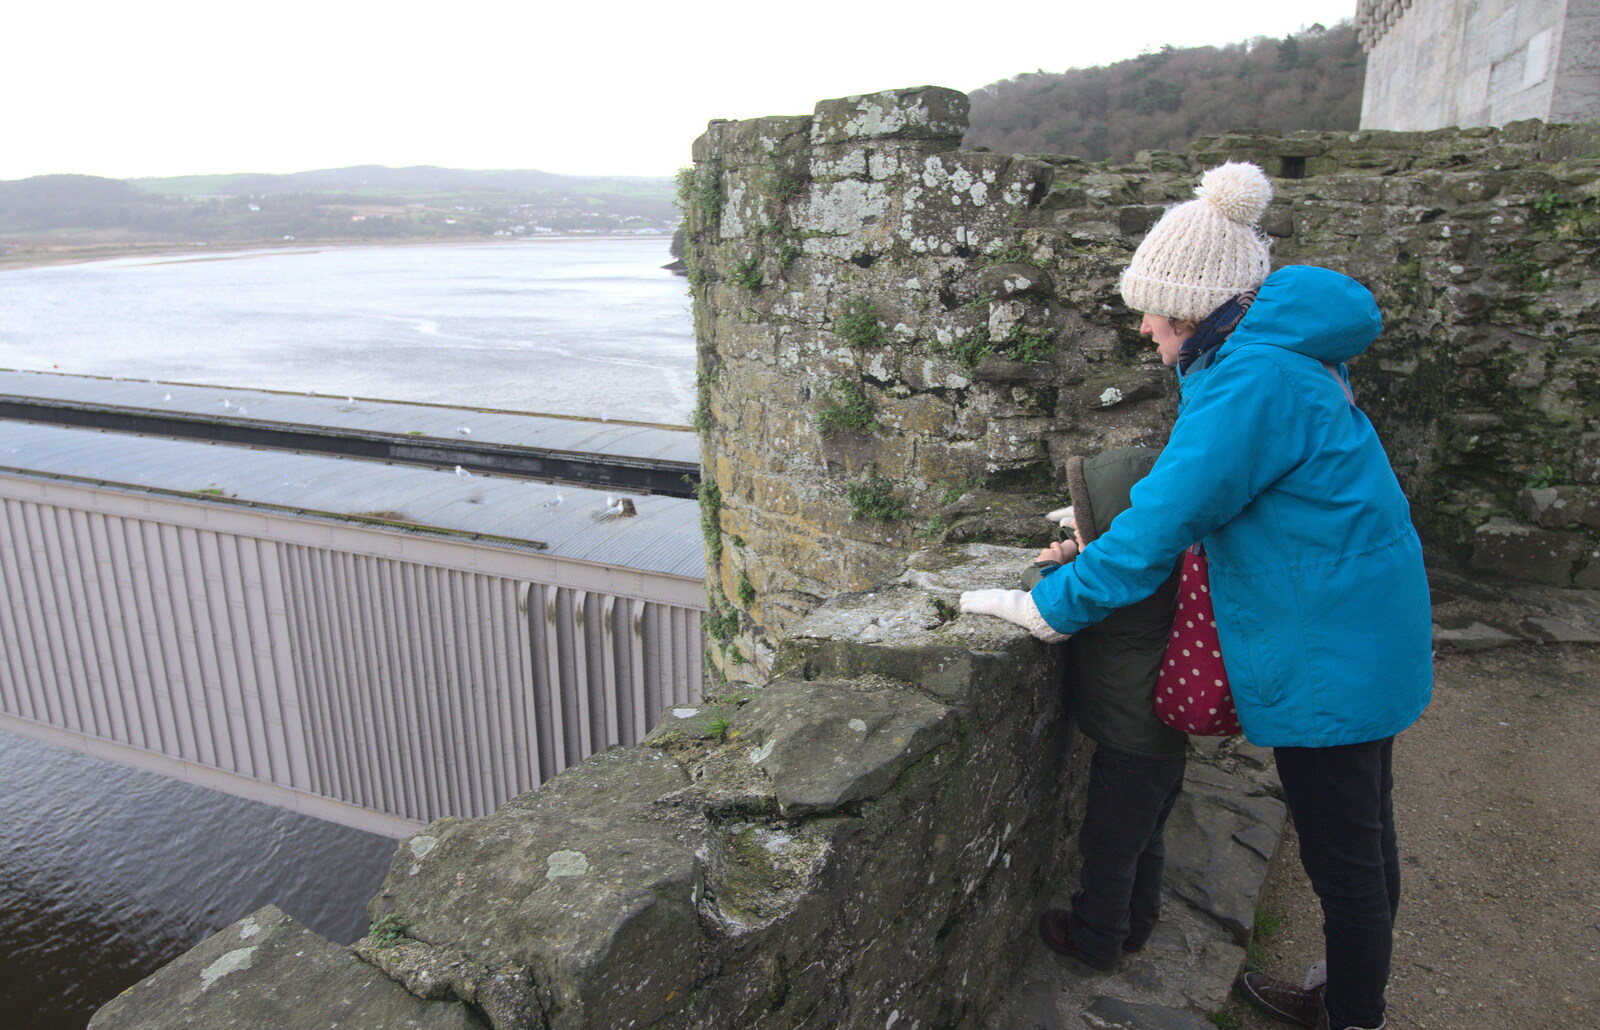 Harry and Isobel peer over the walls from Conwy, Holyhead and the Ferry to Ireland - 21st December 2015